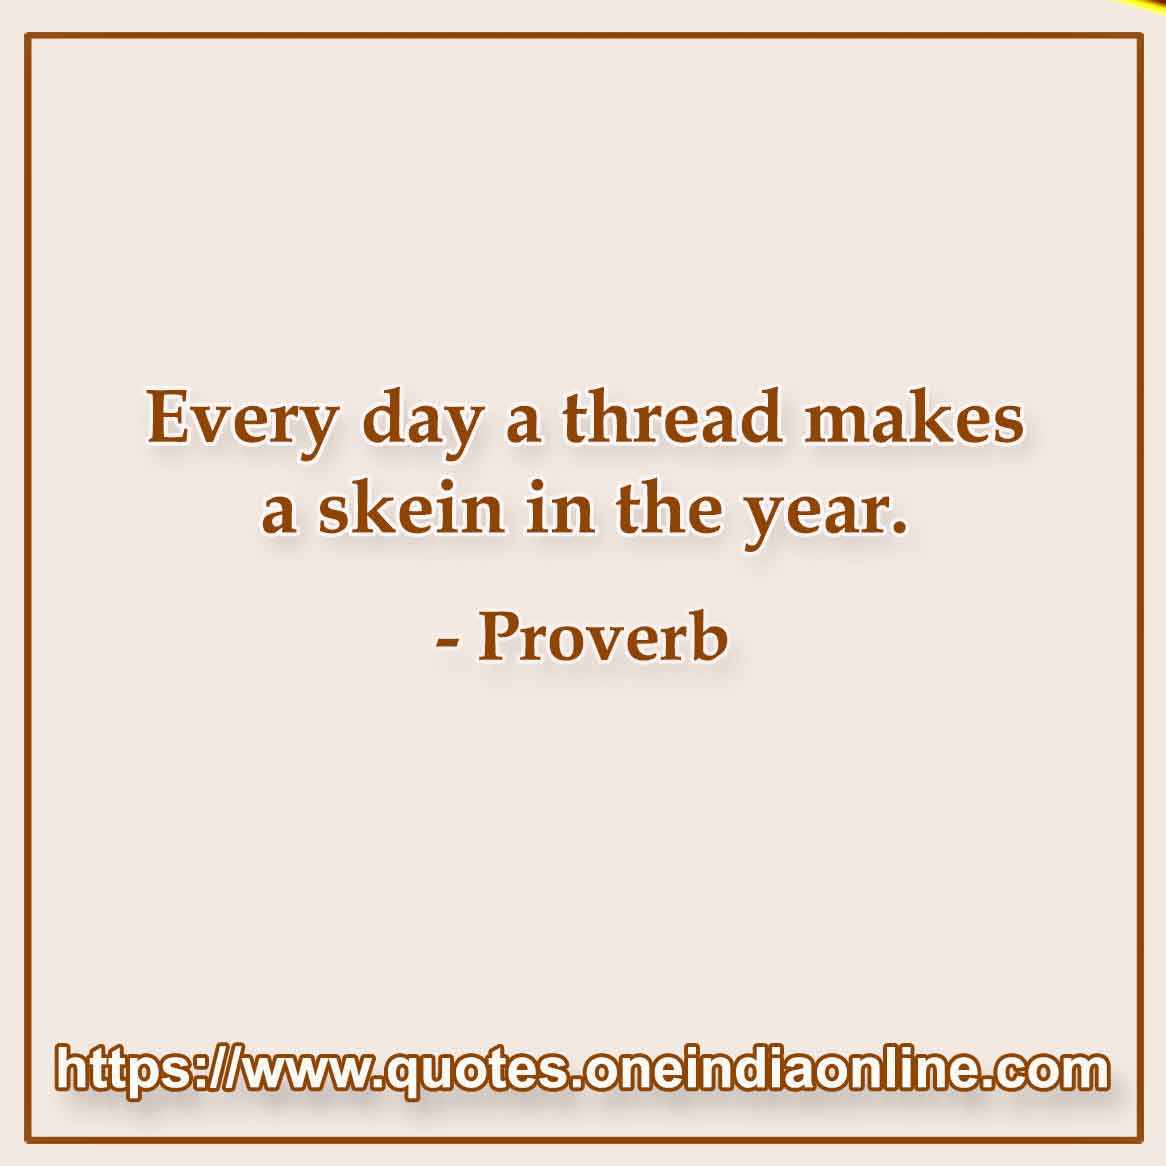 Every day a thread makes a skein in the year.

Dutch Proverbs